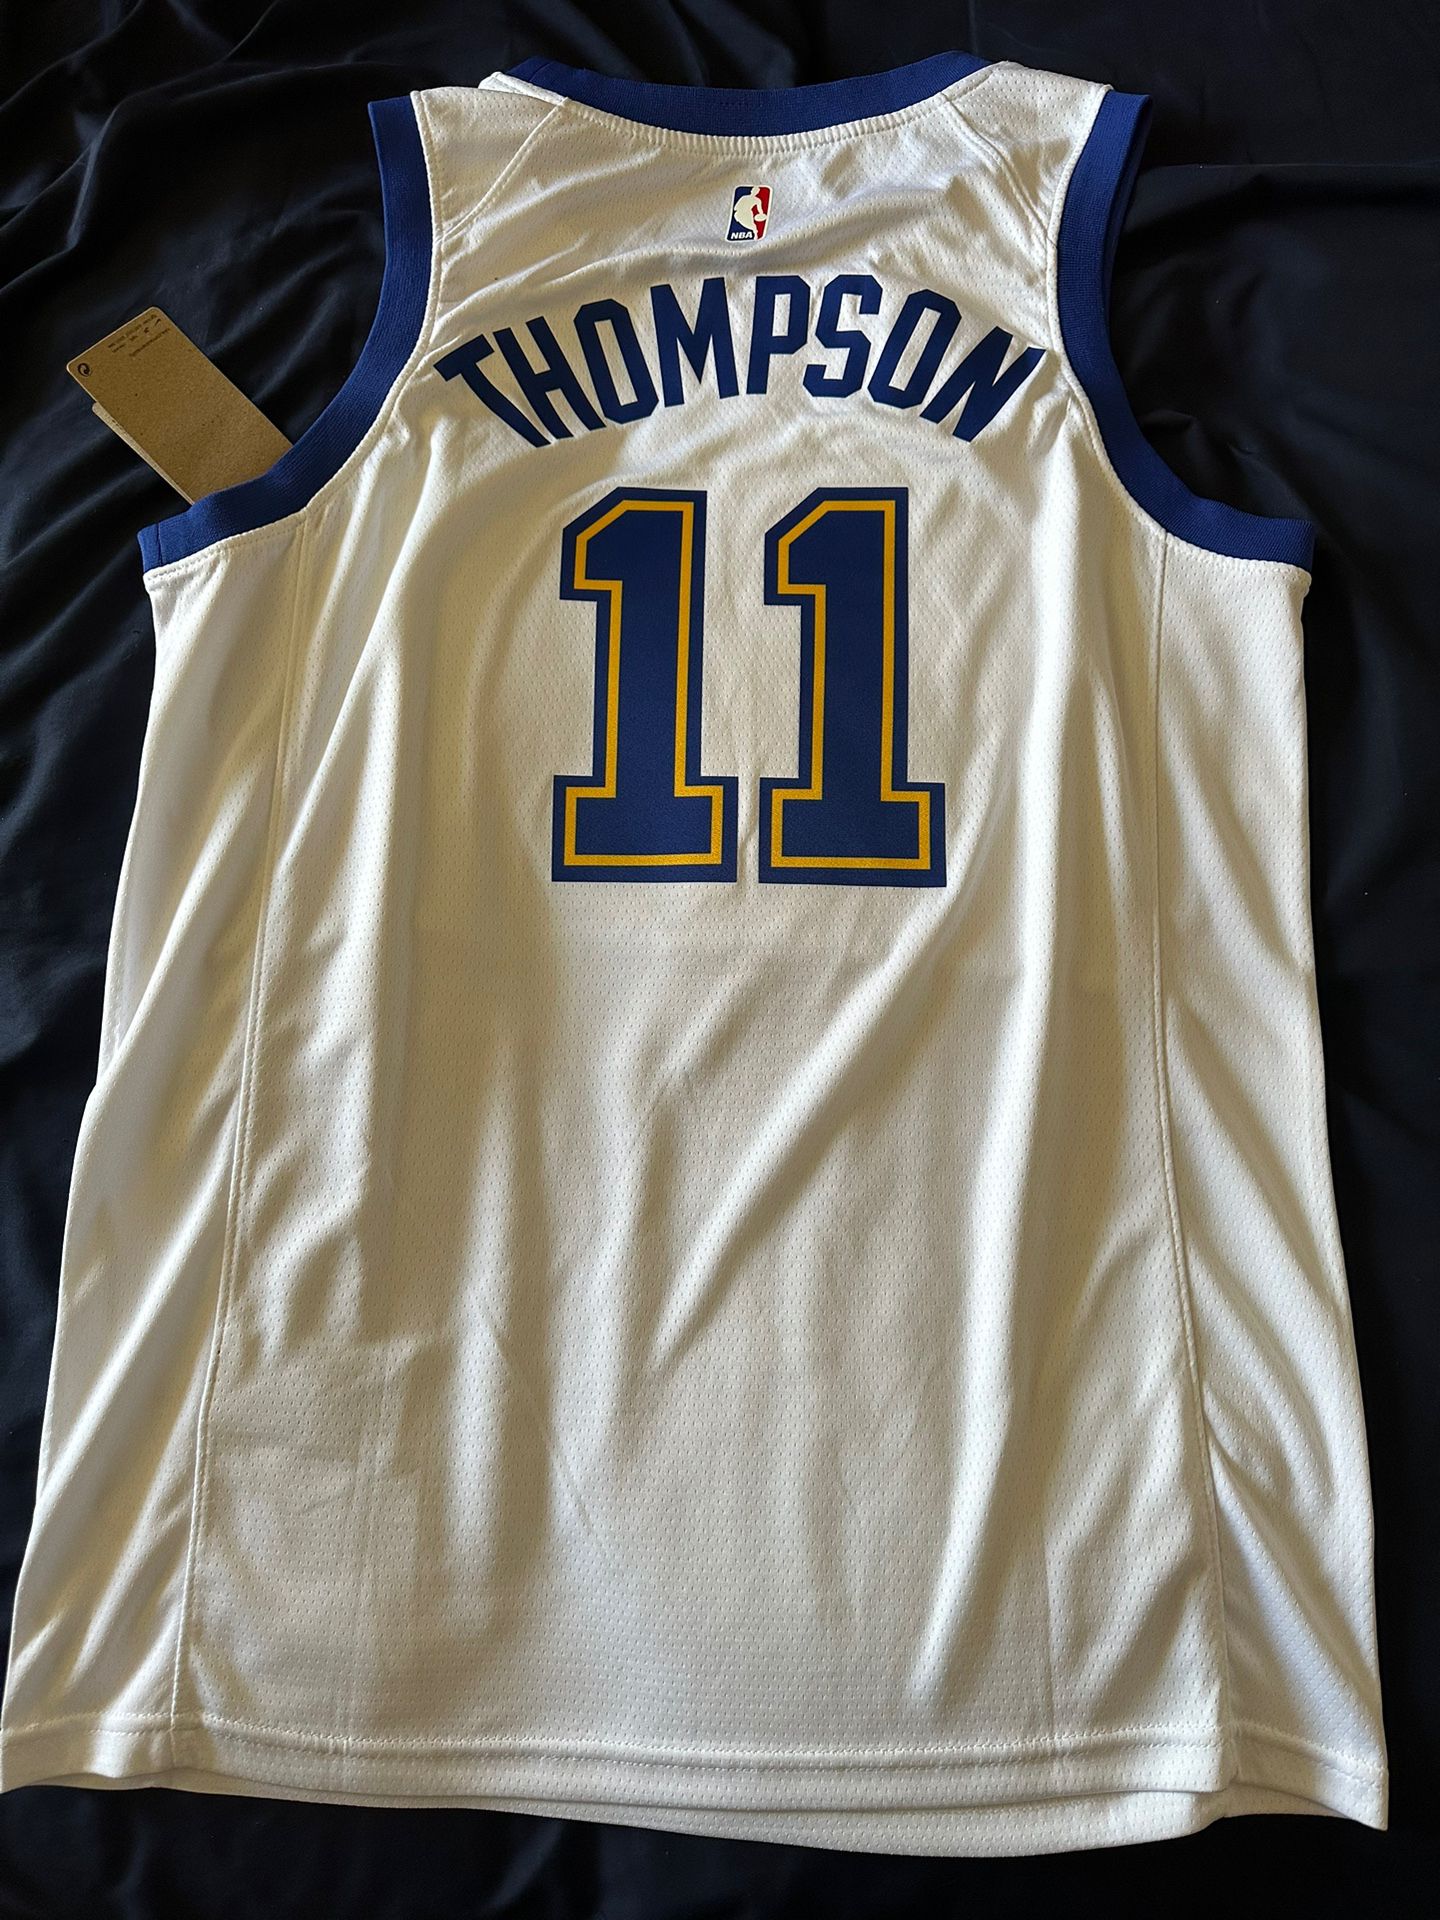 Klay Thompson 11 clay Golden State Warriors city edition black jersey mens  small medium large XL for Sale in San Jose, CA - OfferUp